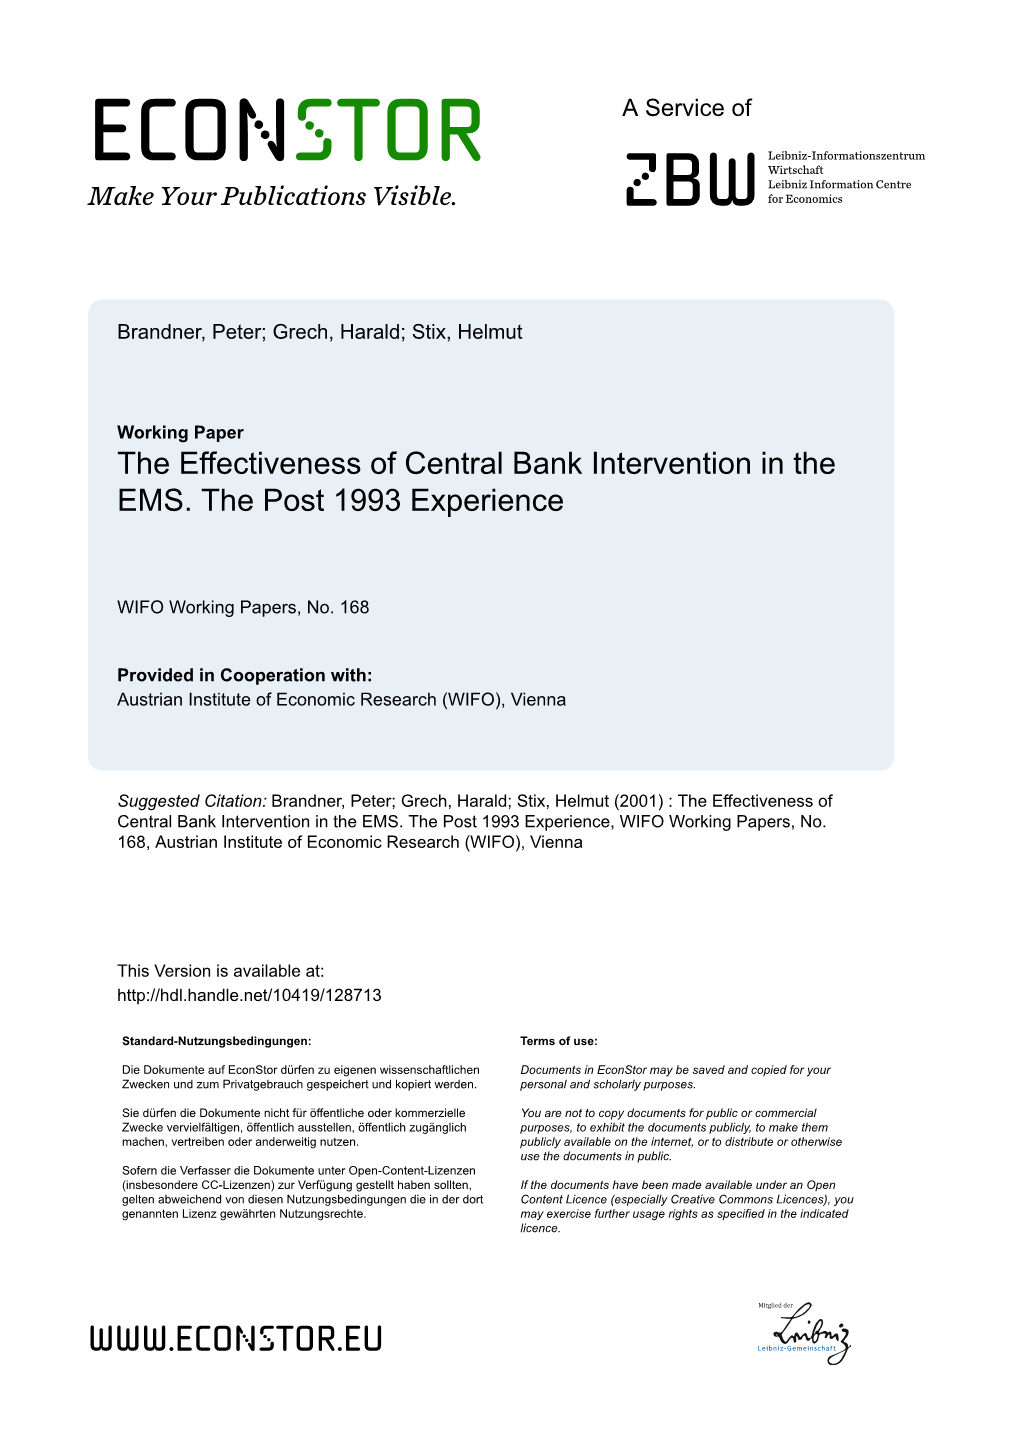 The Effectiveness of Central Bank Intervention in the EMS. the Post 1993 Experience